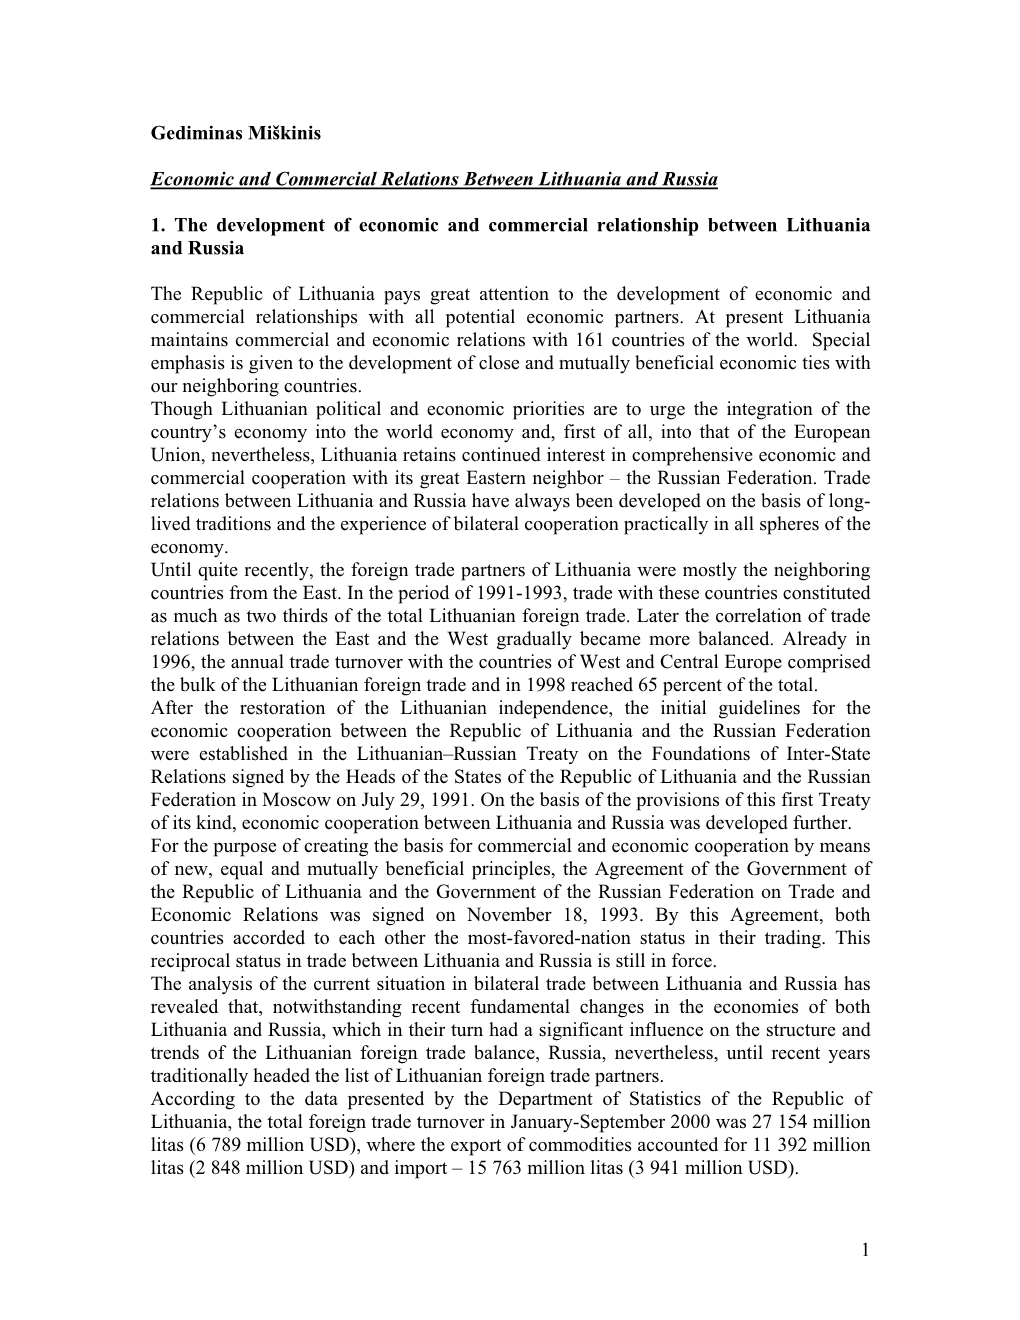 Economic and Commercial Relations Between Lithuania and Russia